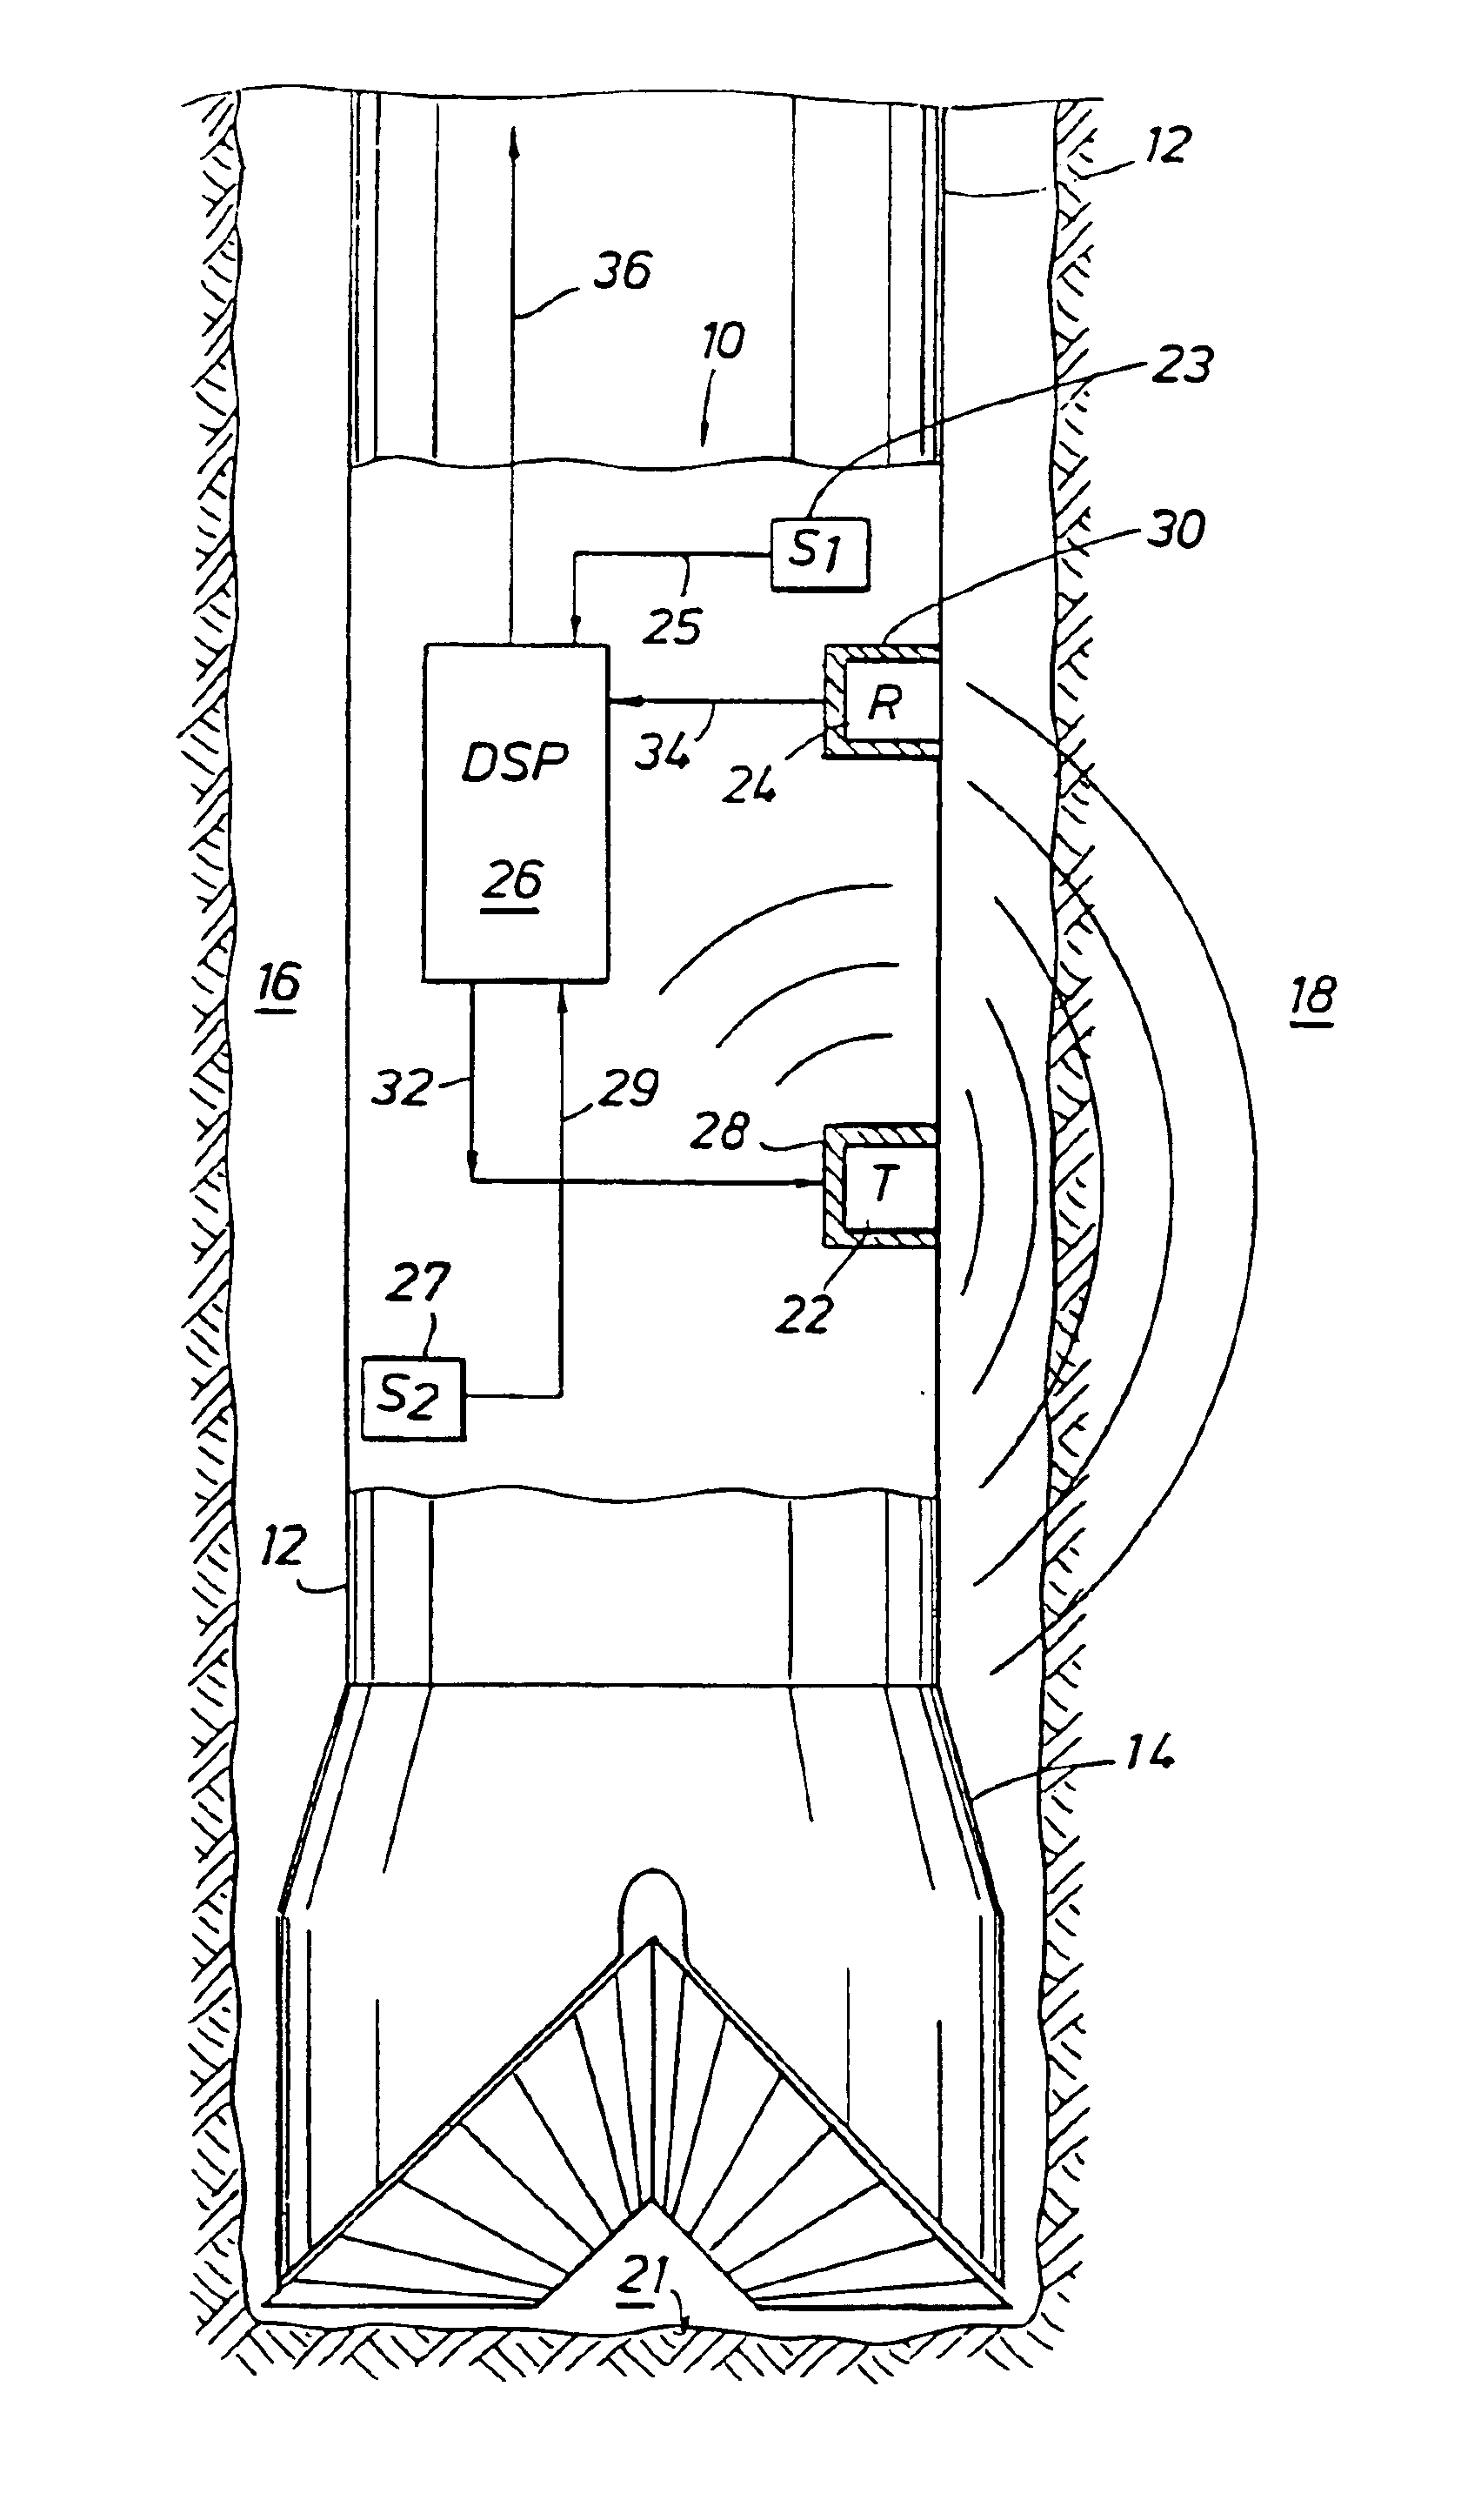 Method and apparatus for cancellation of unwanted signals in MWD acoustic tools